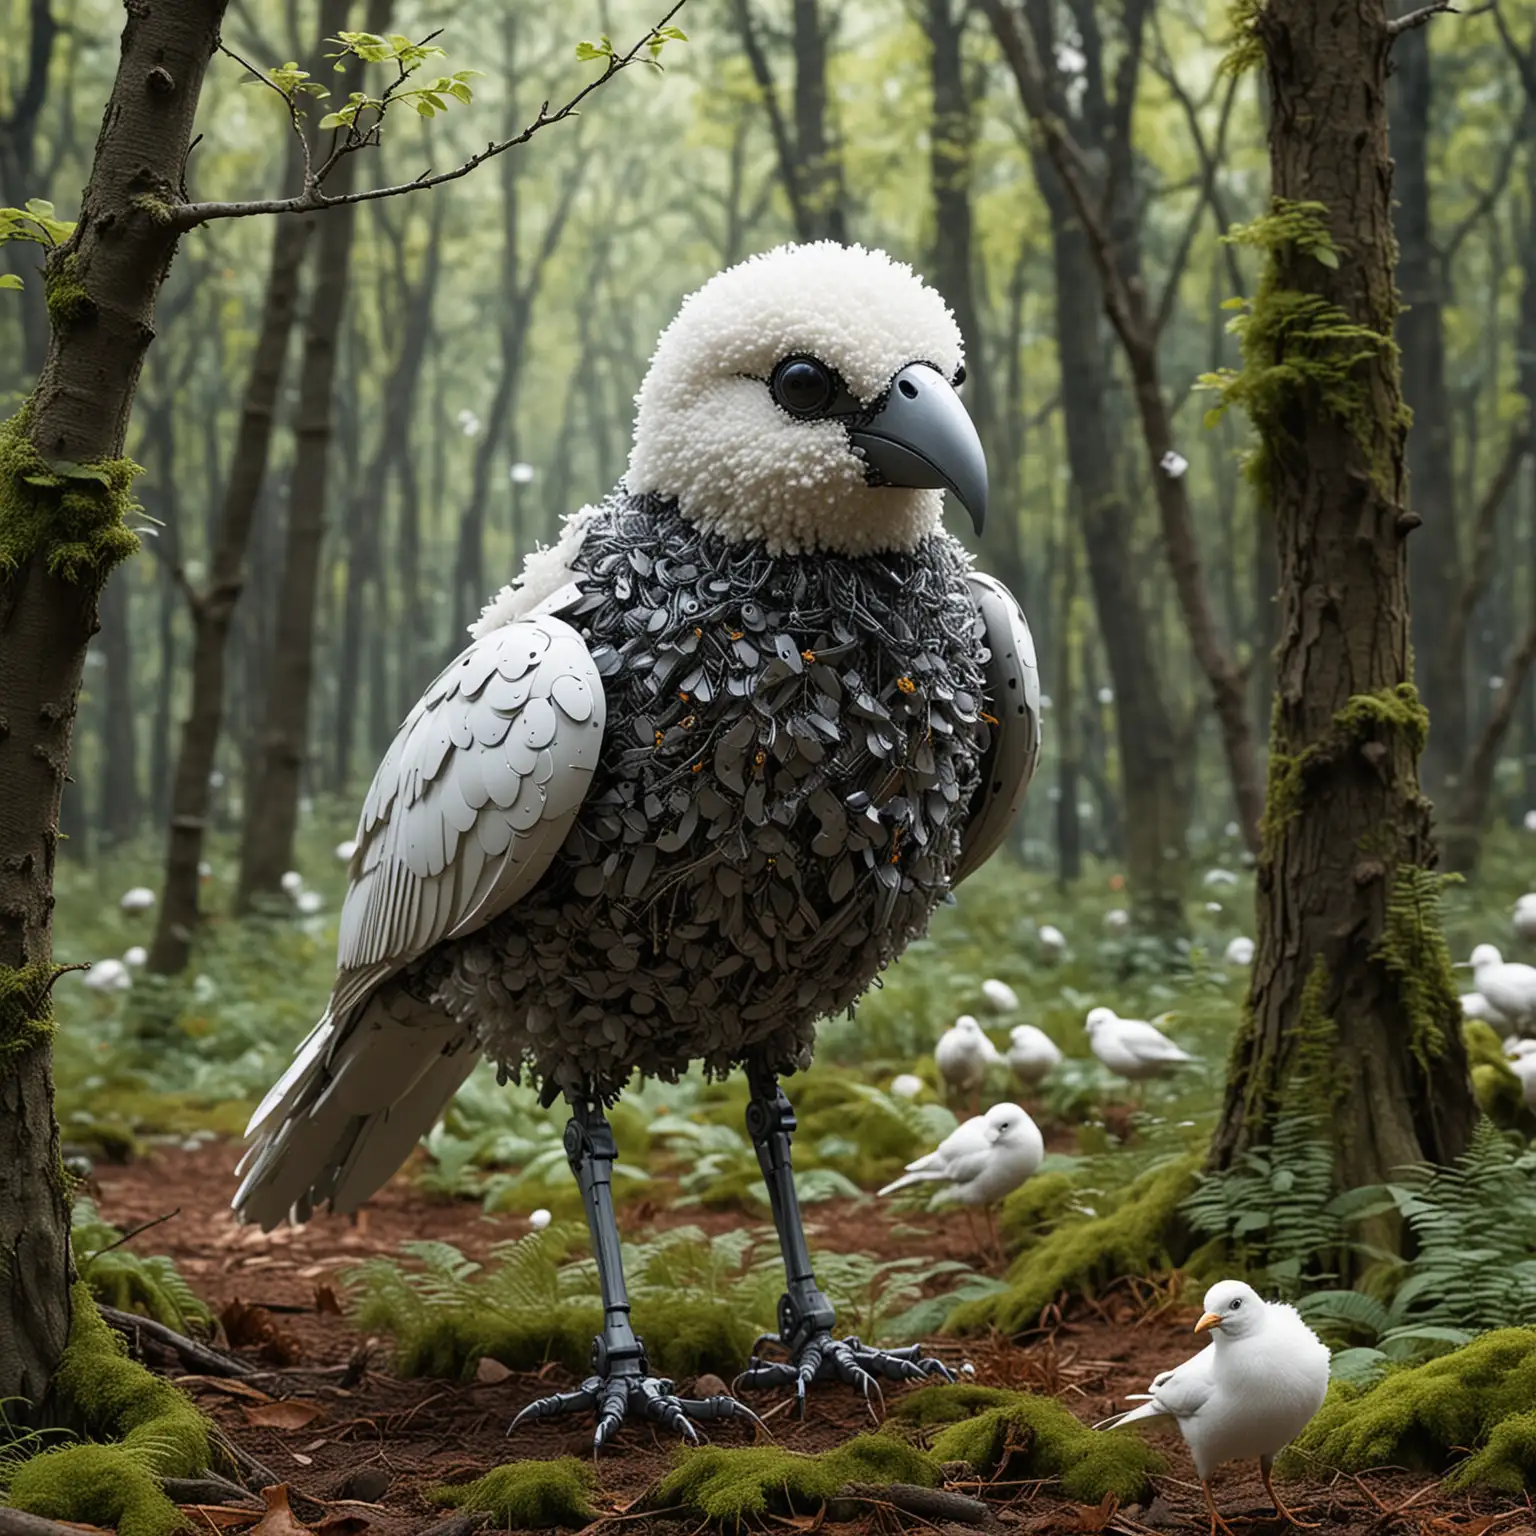 Robotic Spies in Avian Disguise Blend into Nature